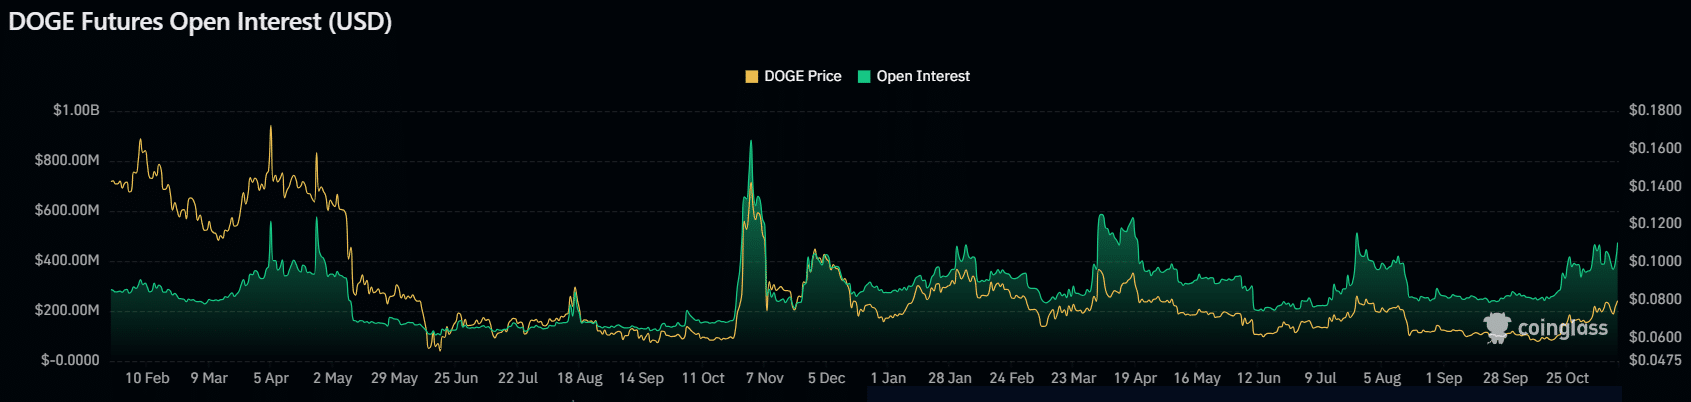 Dogecoin Mark Prediction as DOGE Becomes Finest Performing Coin in the Market – Time to Aquire? - 1700249647 dogecoin open interest